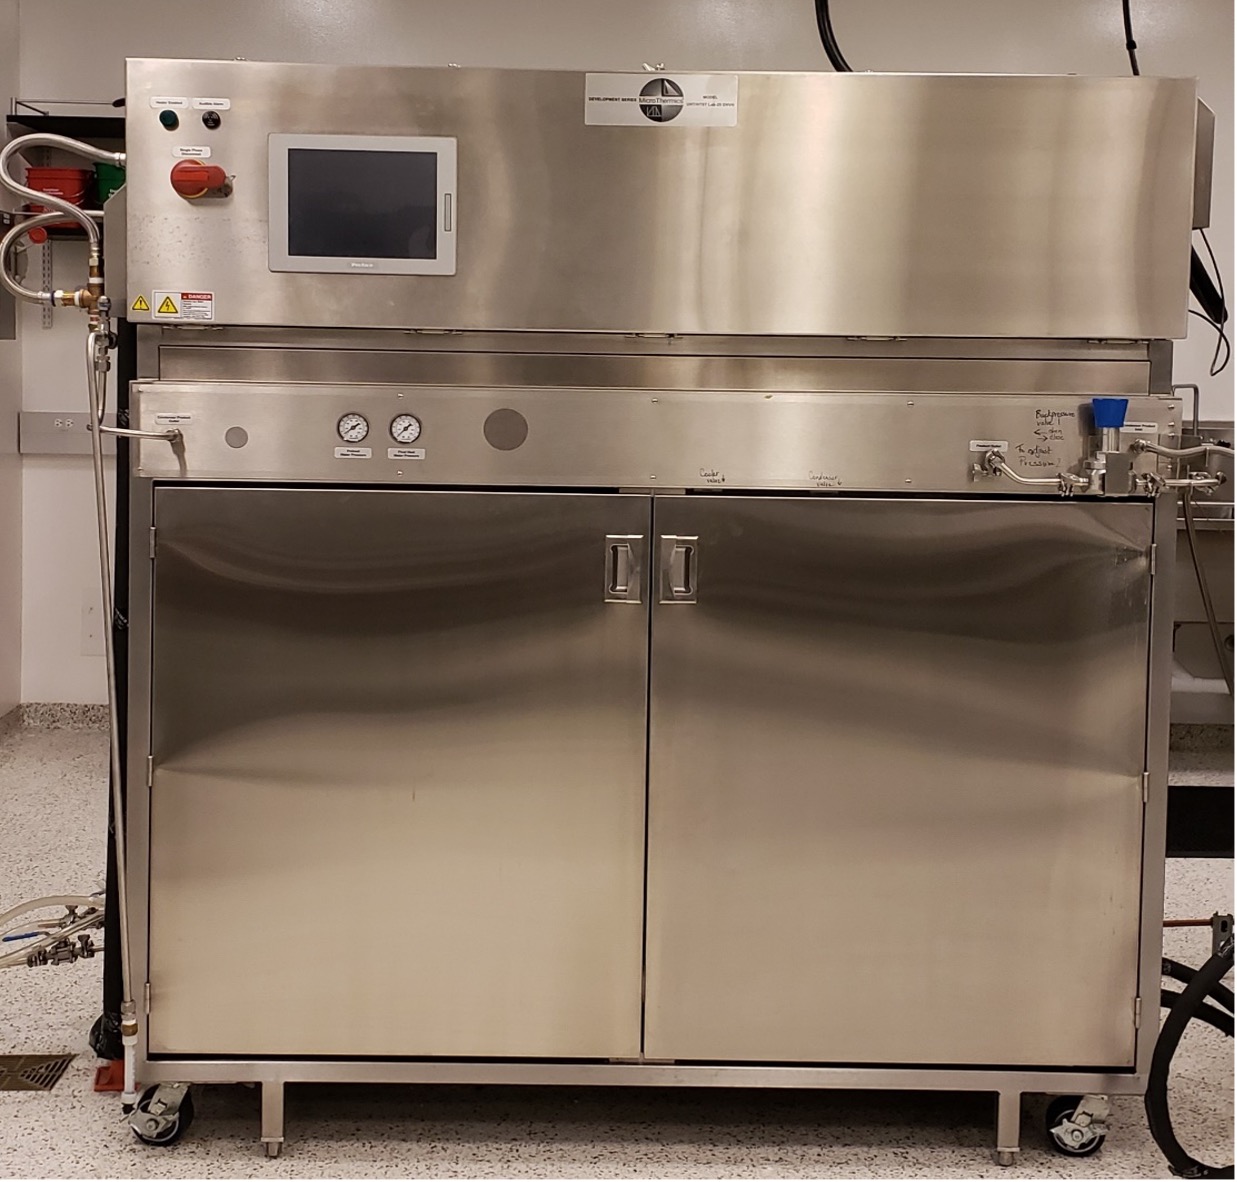 MicroThermics UHT/HTST Pasteurizer